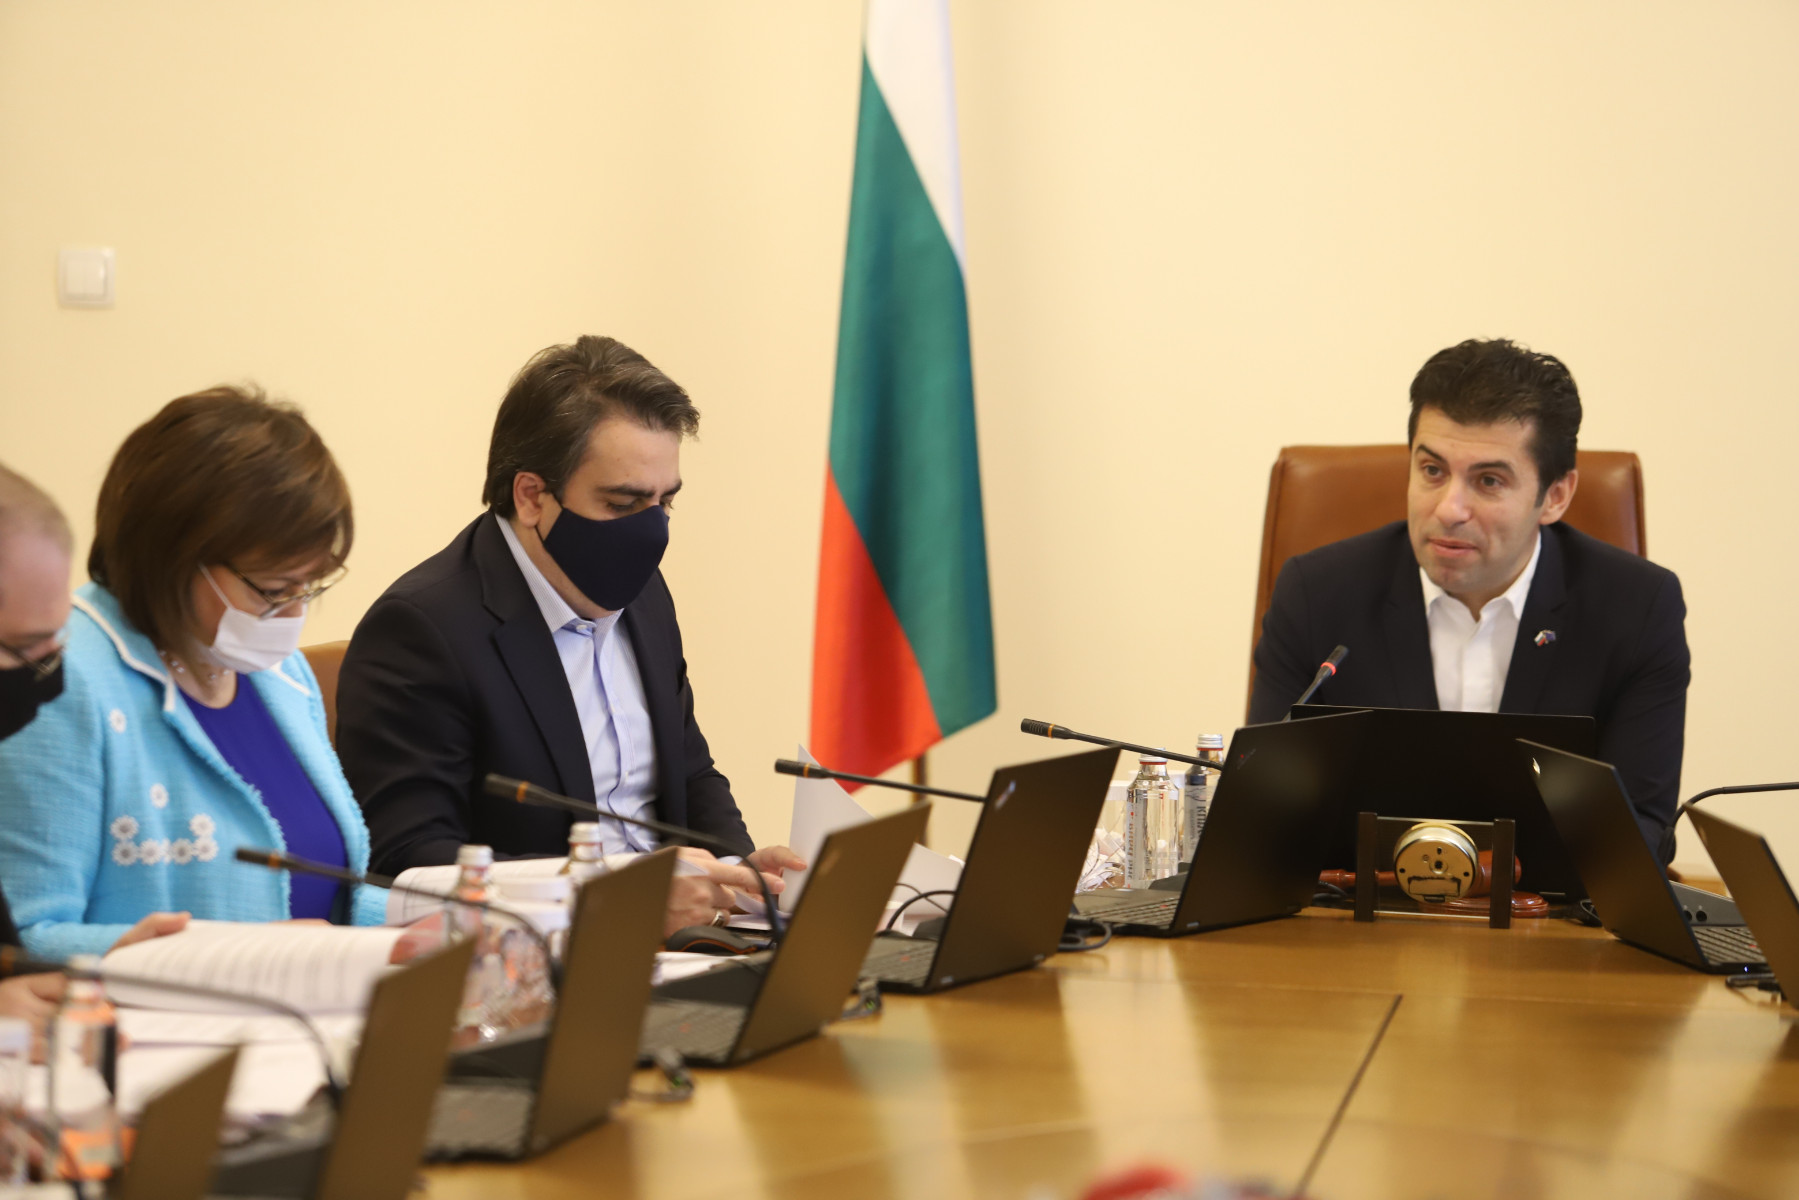 Bulgaria’s cabinet provides financial assistance to business and pensioners